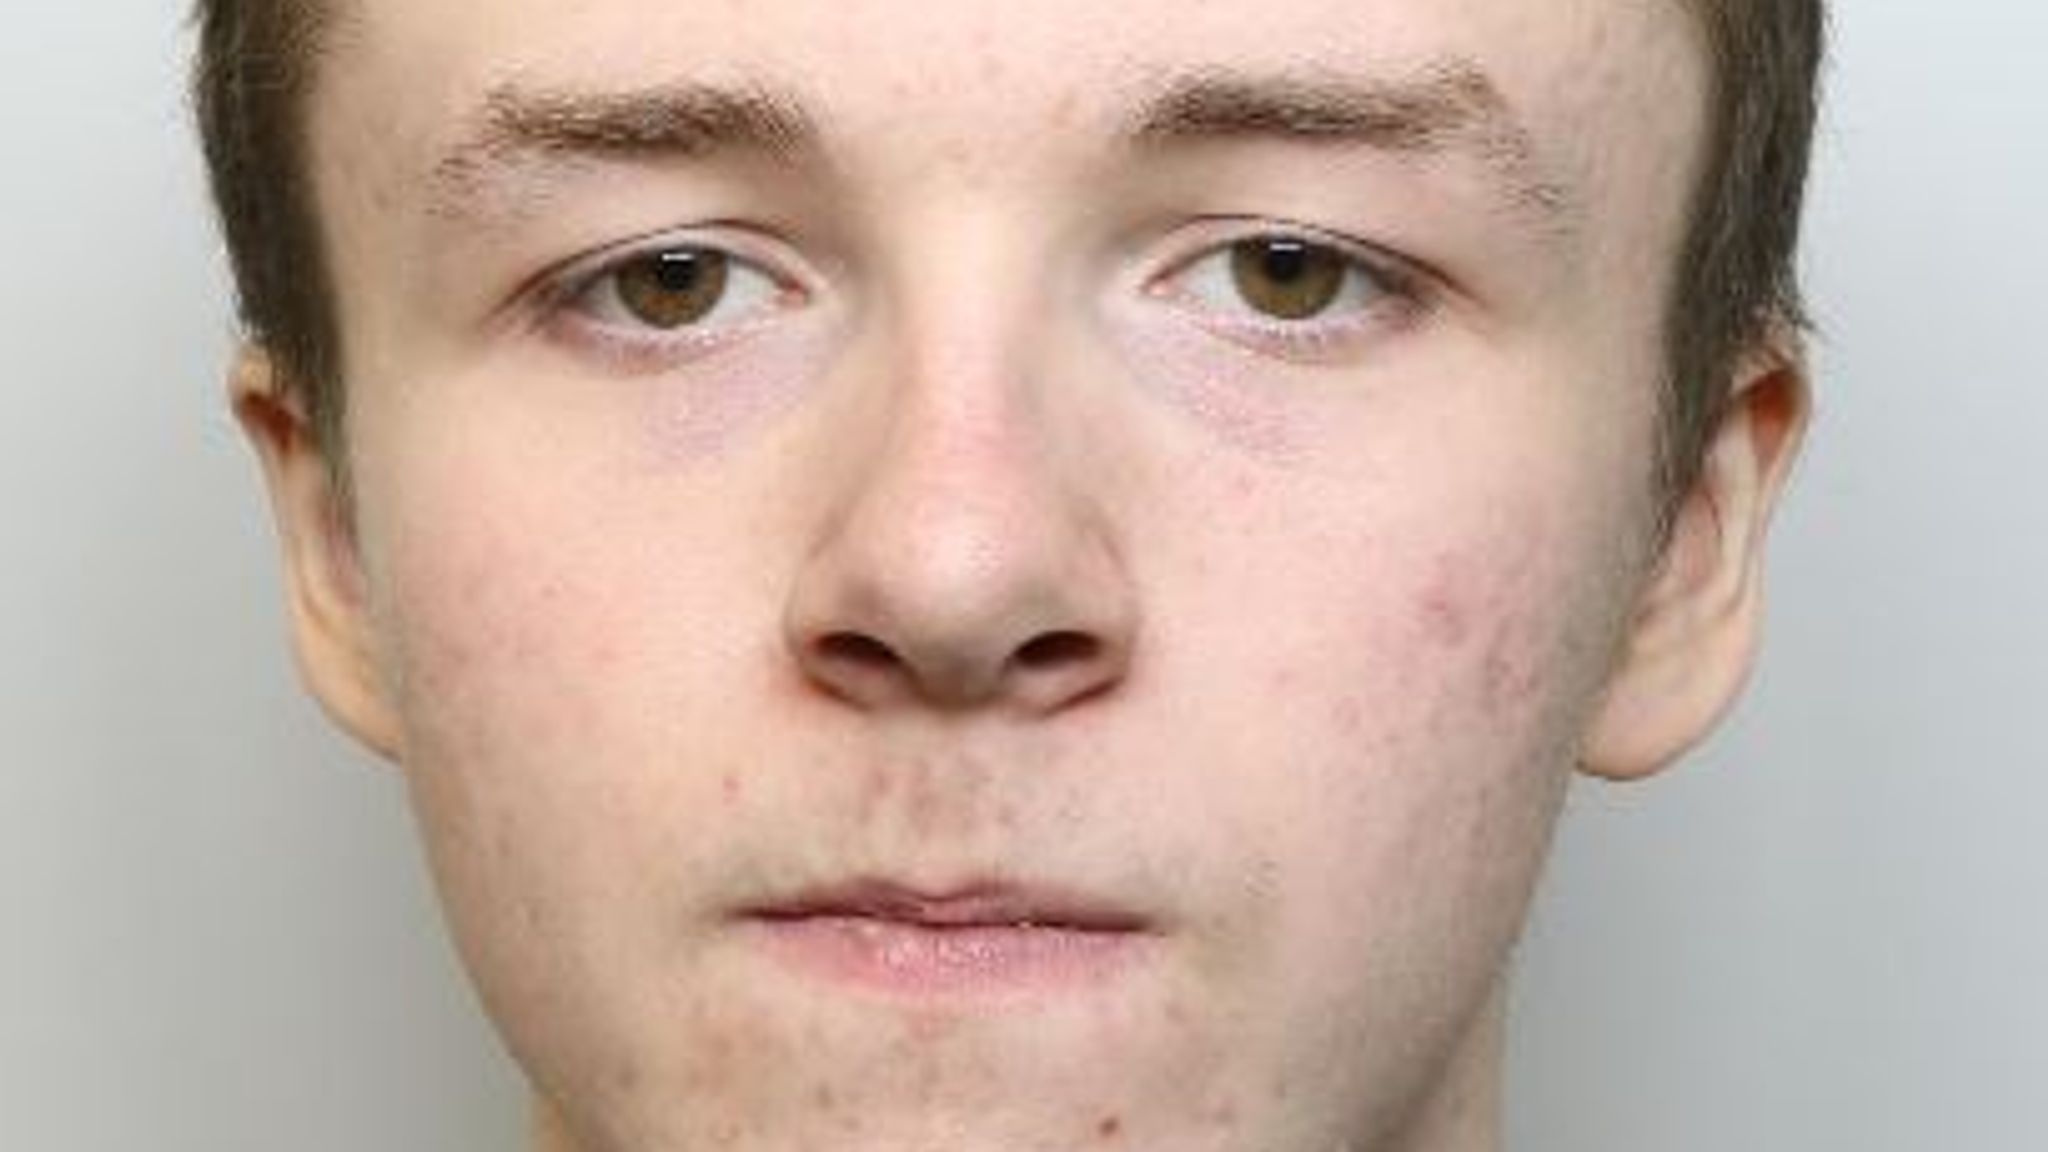 Do not approach him Teen arsonist escapes mental health facility in Northampton UK News Sky News